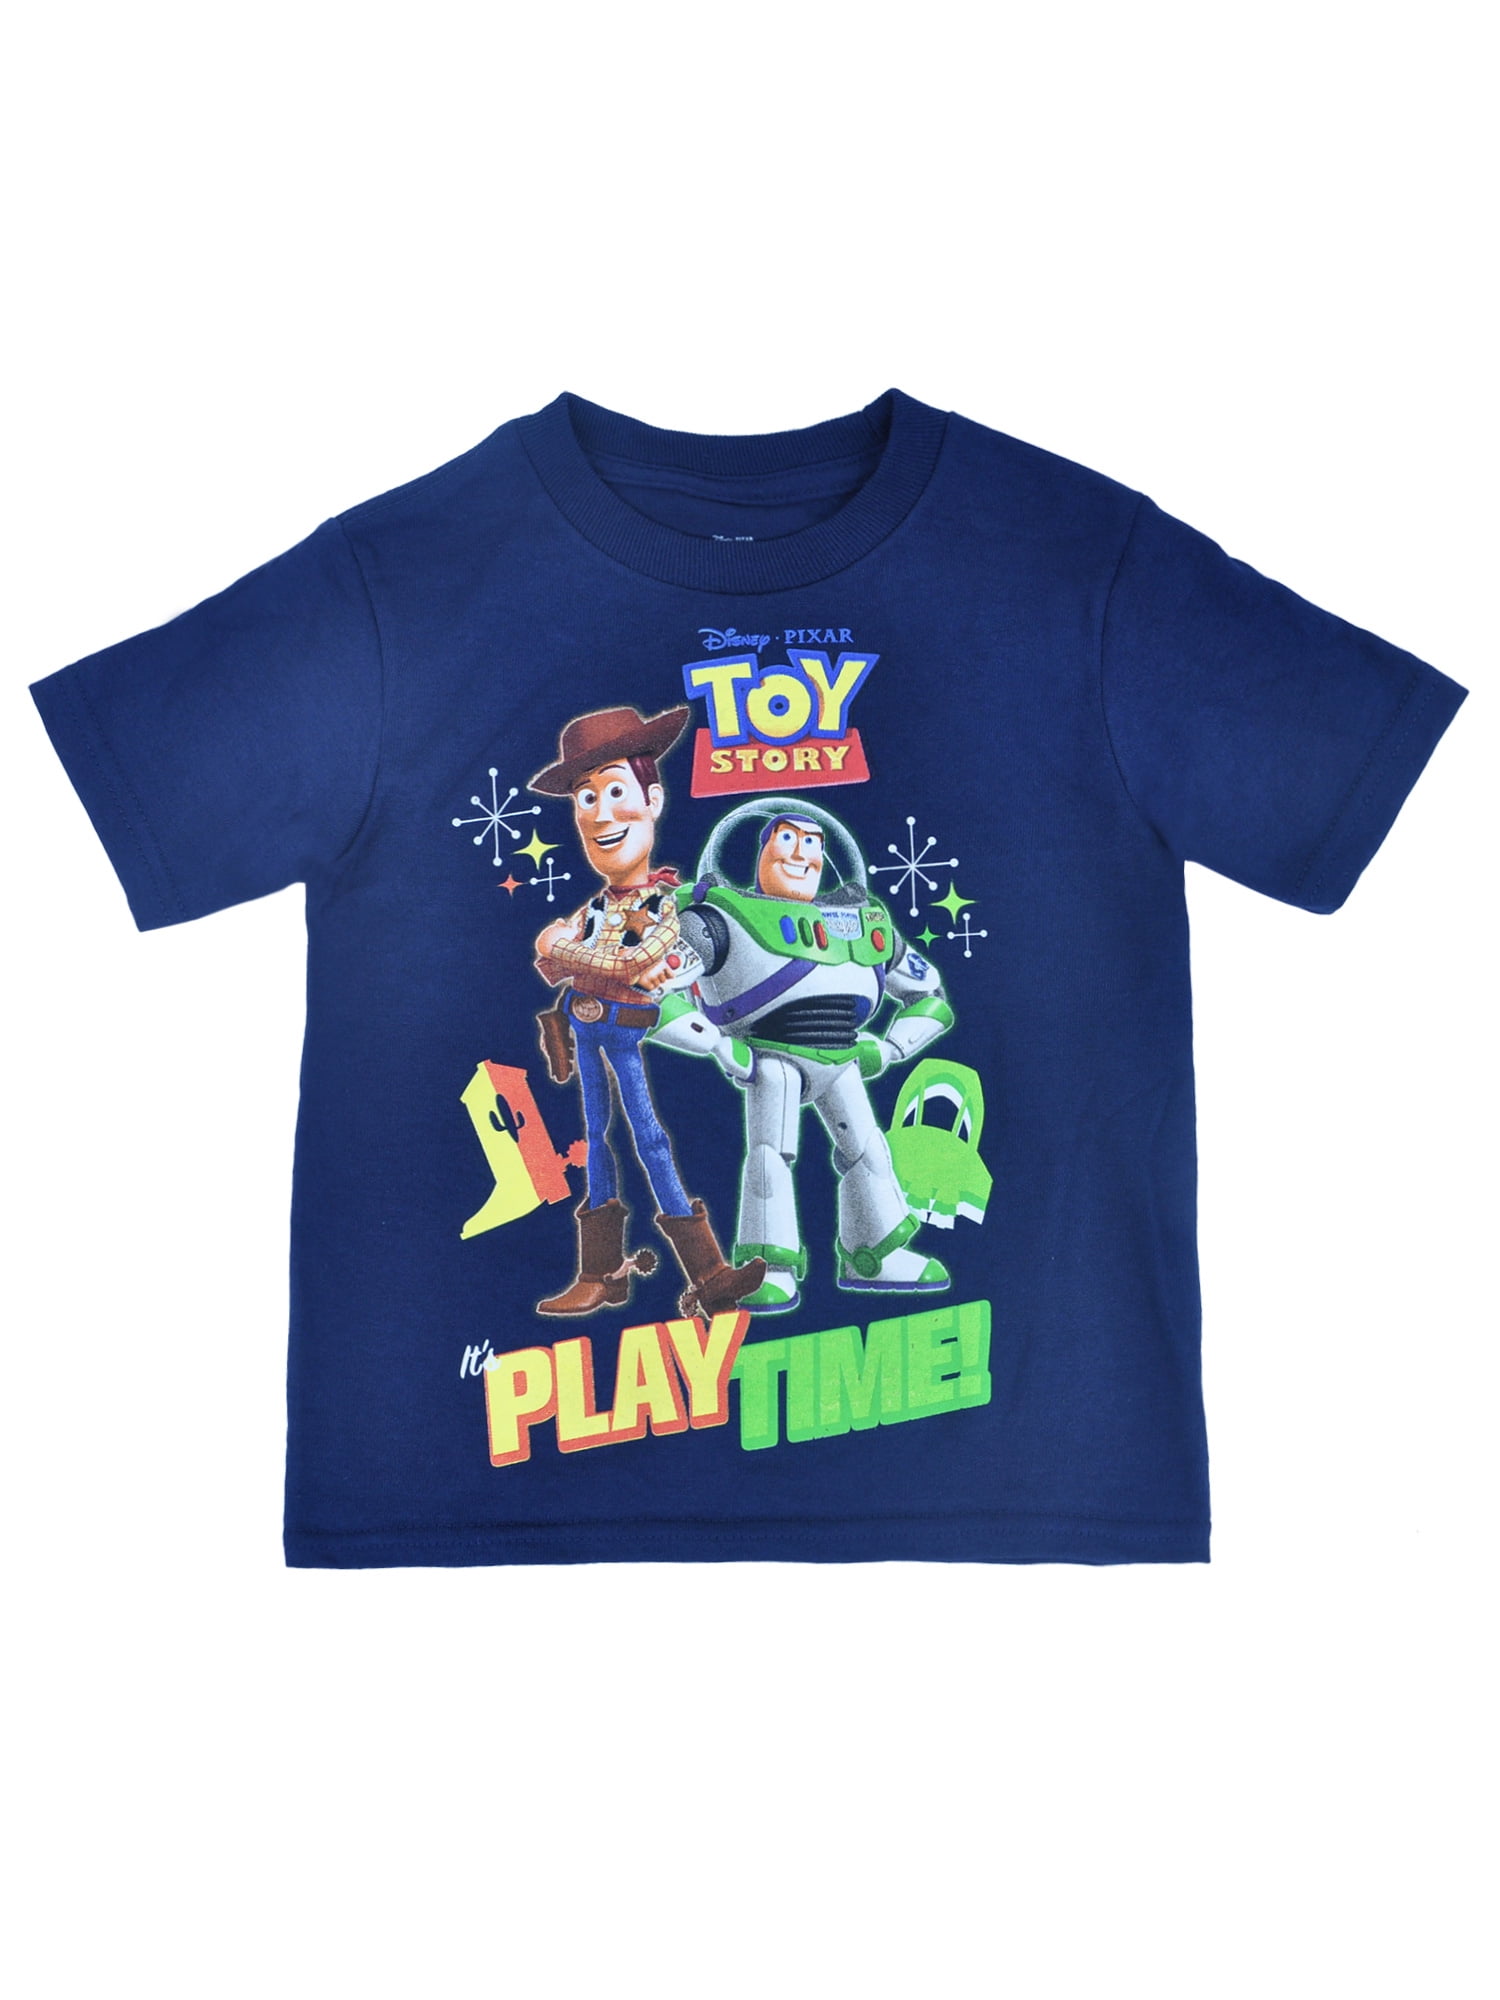 Toy Story T-ShirtKids Toy Story TopBoys Toy Story Tee 